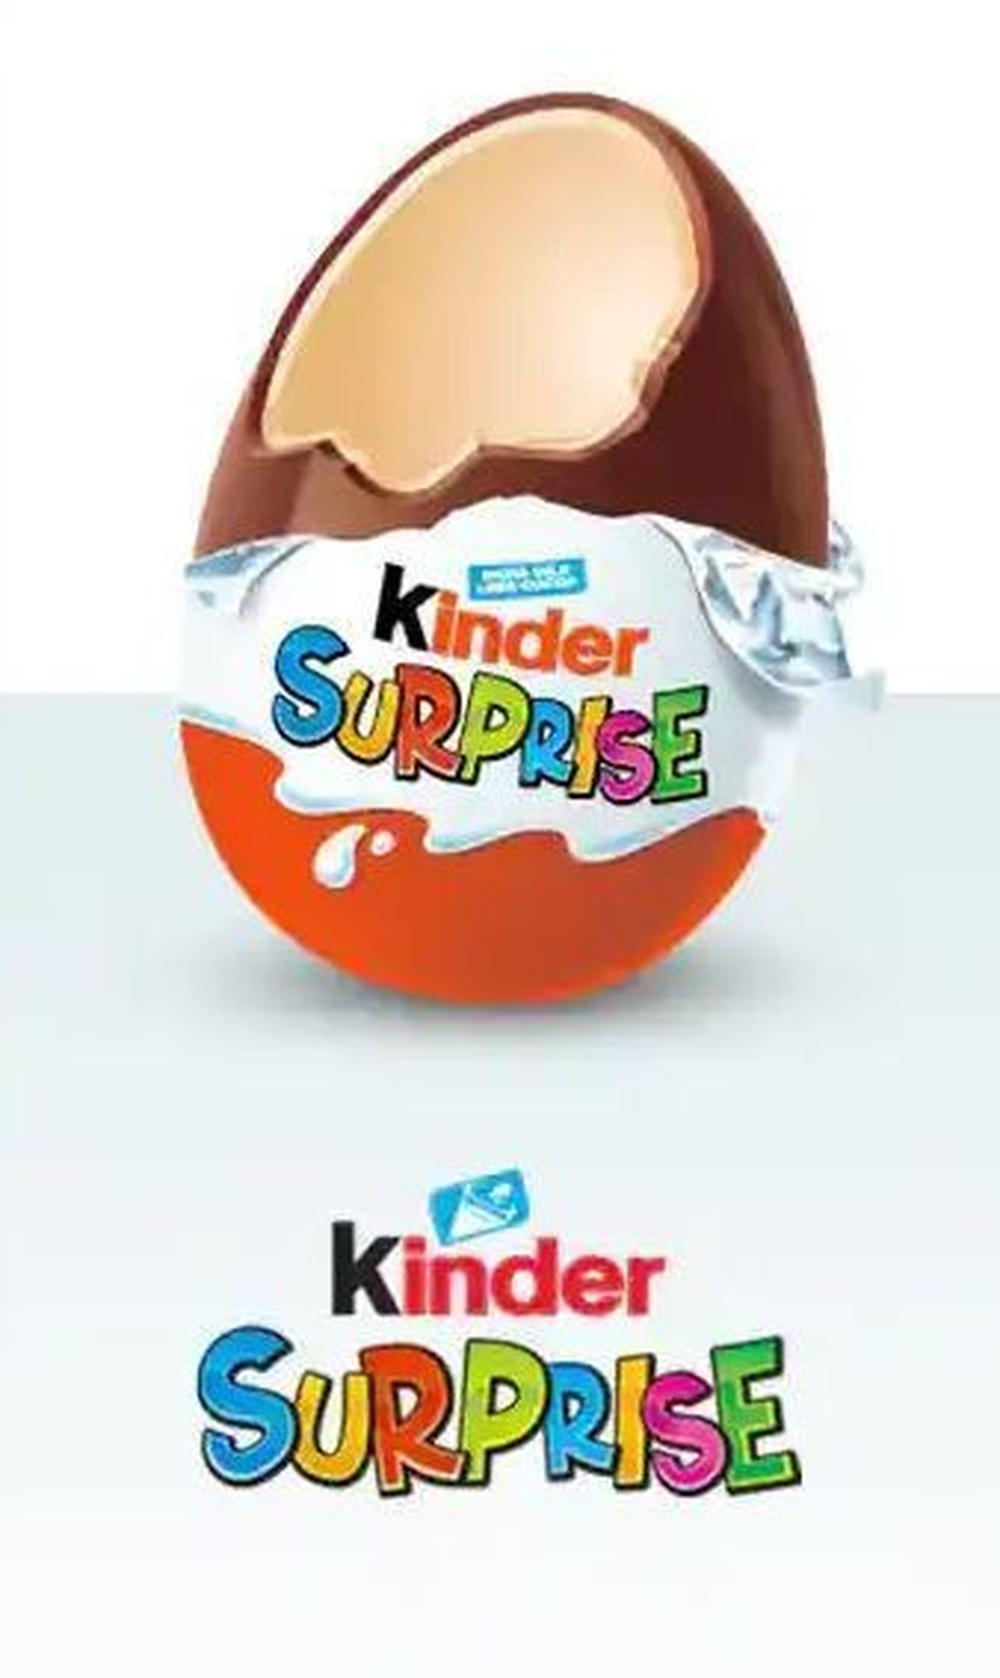 Kinder Surprise salmonella warning issued as they're recalled